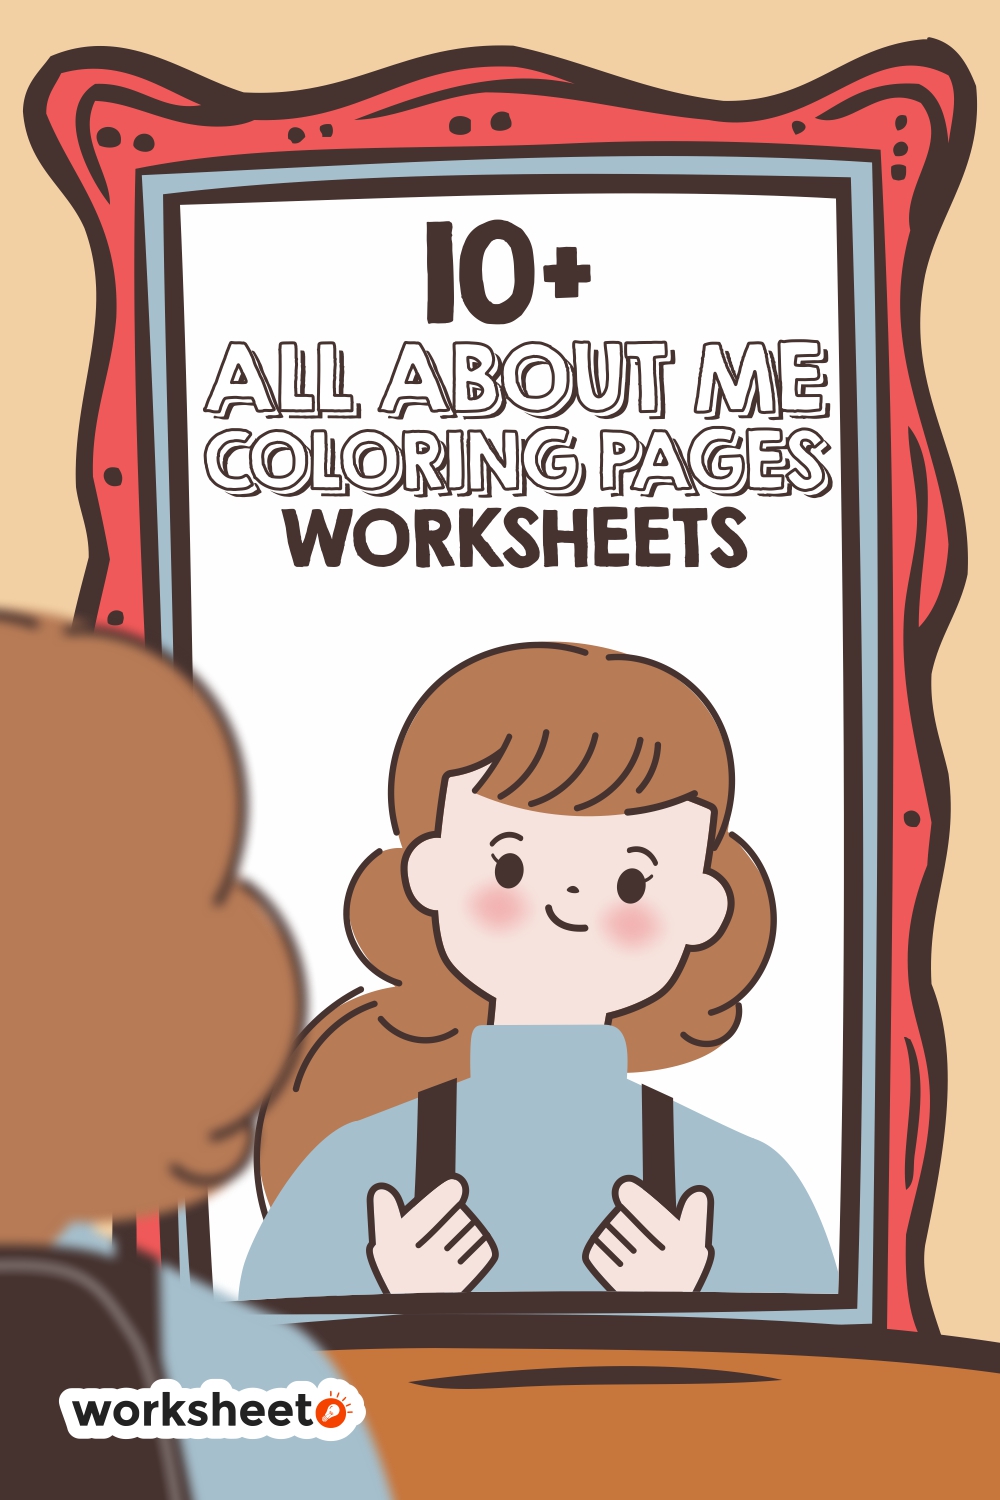 15 Images of All About Me Coloring Pages Worksheets